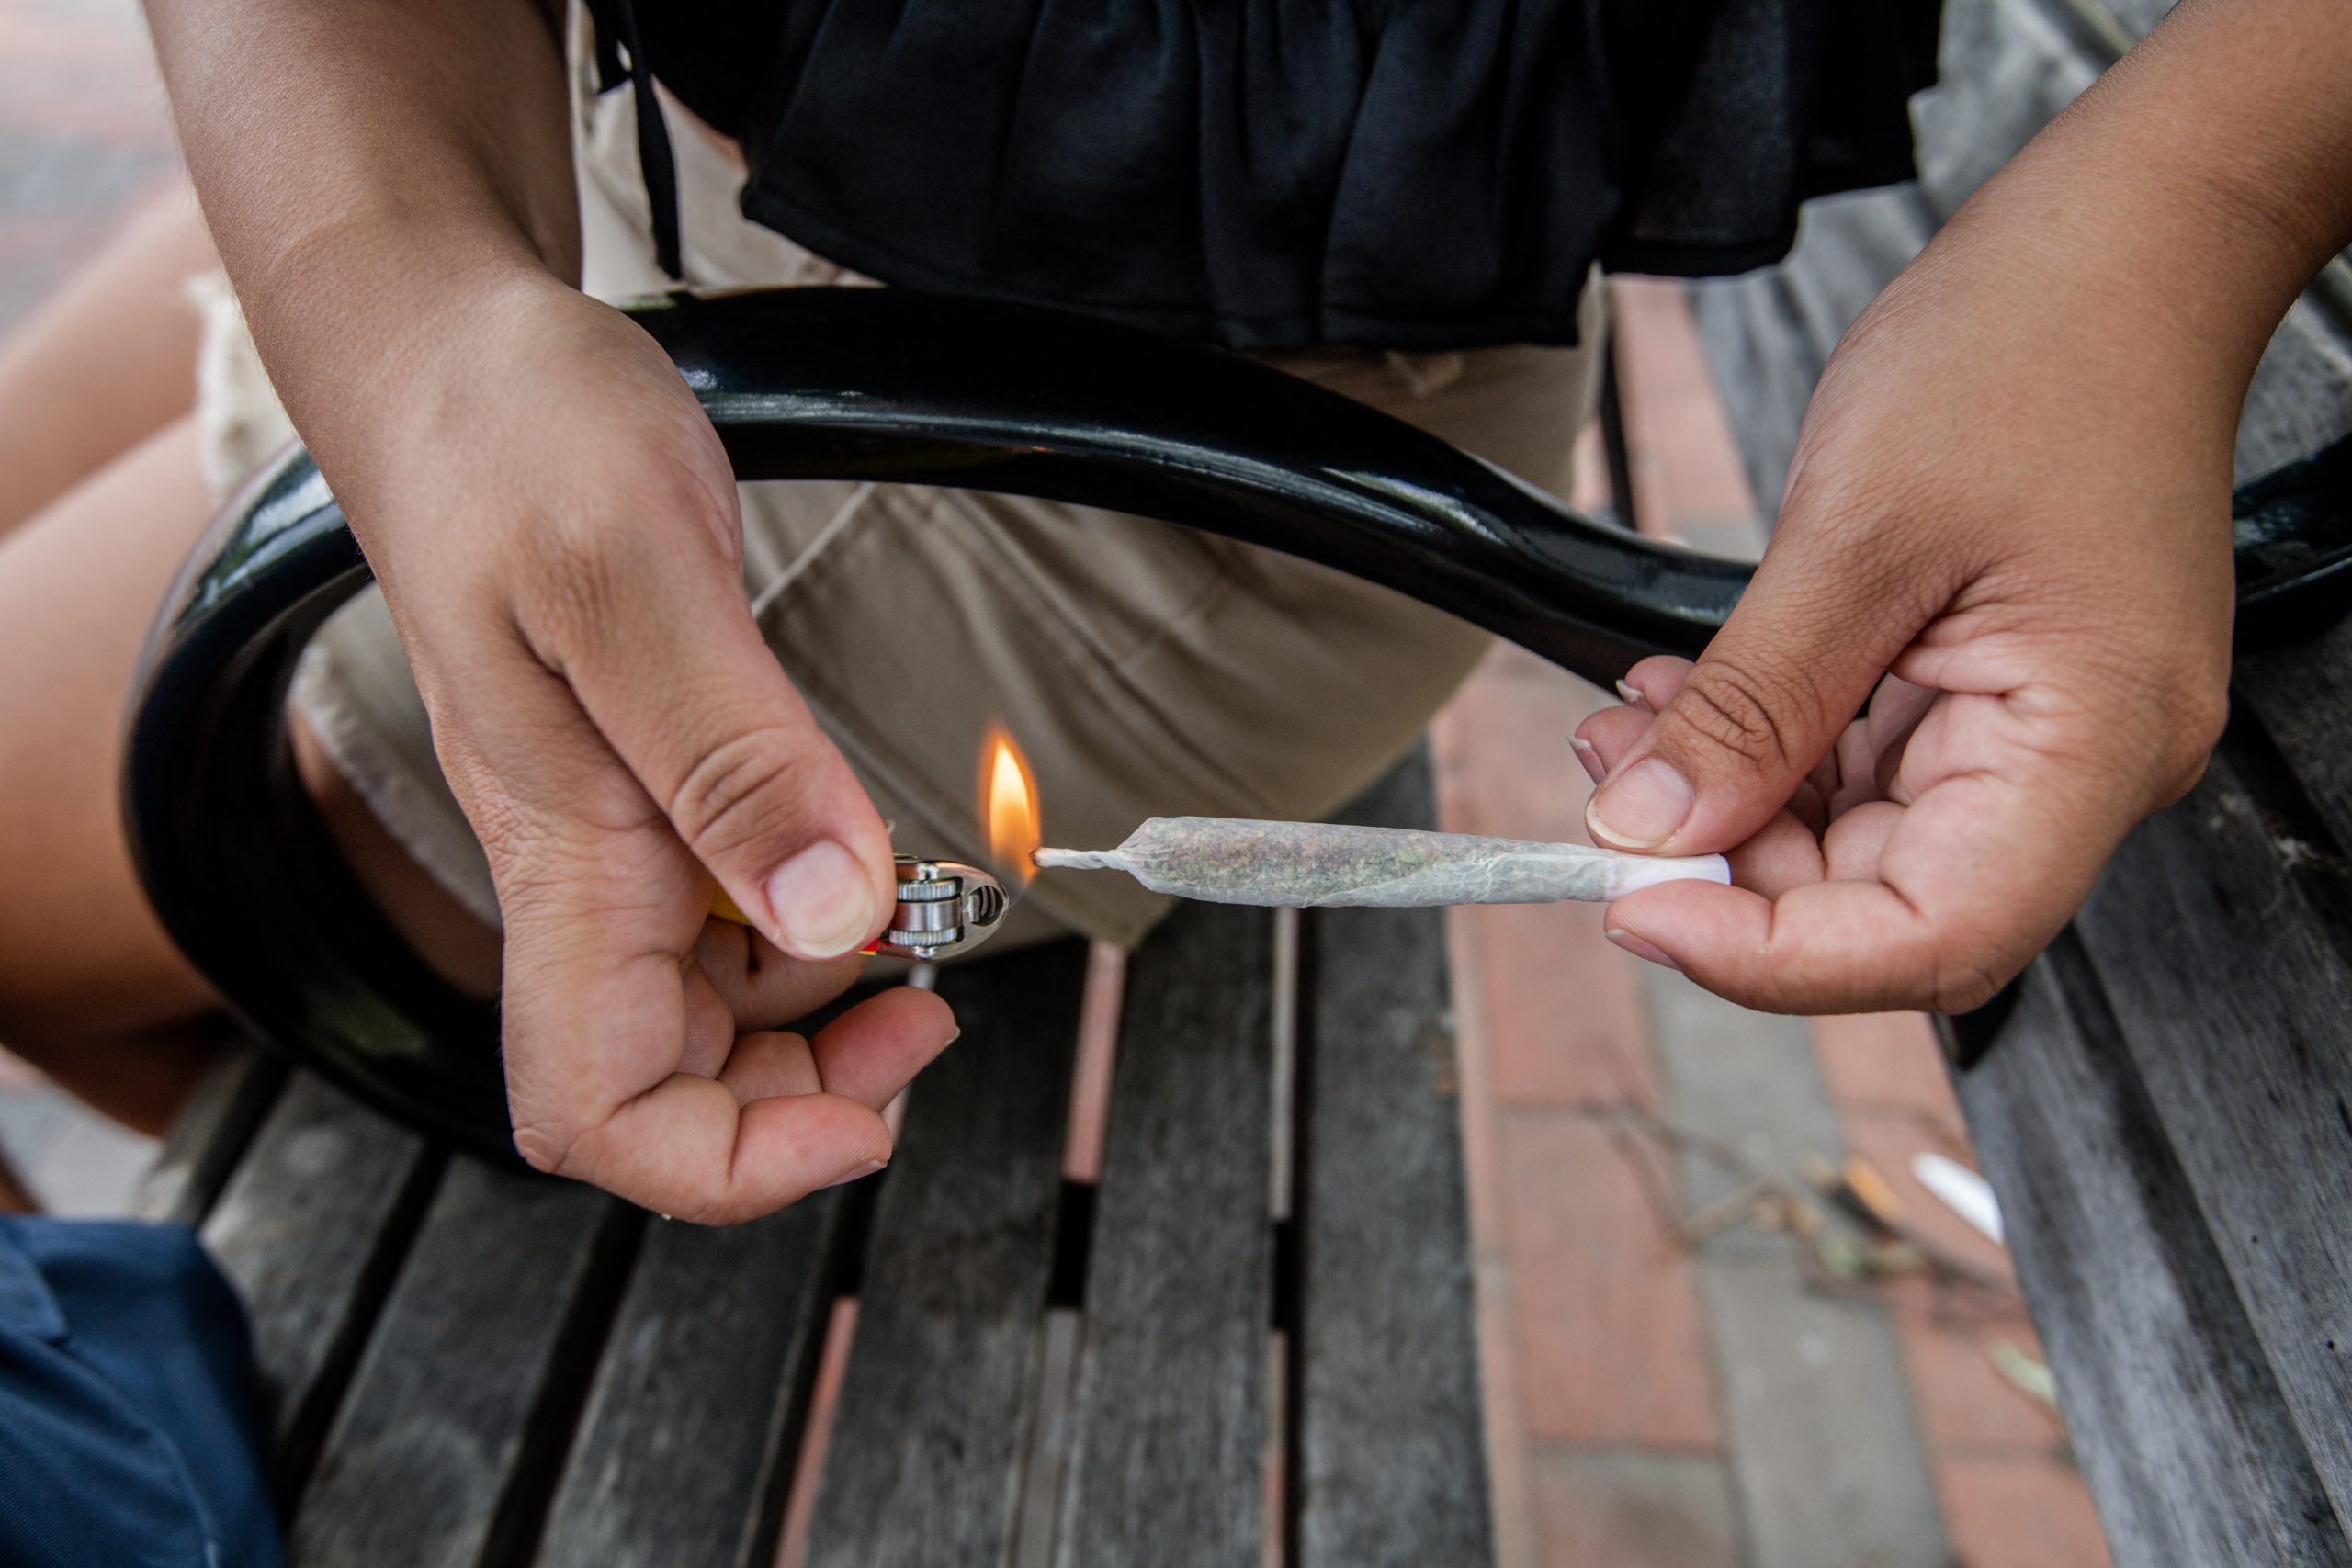 Study Finds Heavy Marijuana Users Face 60% Higher Risk of Heart Attack, Stroke